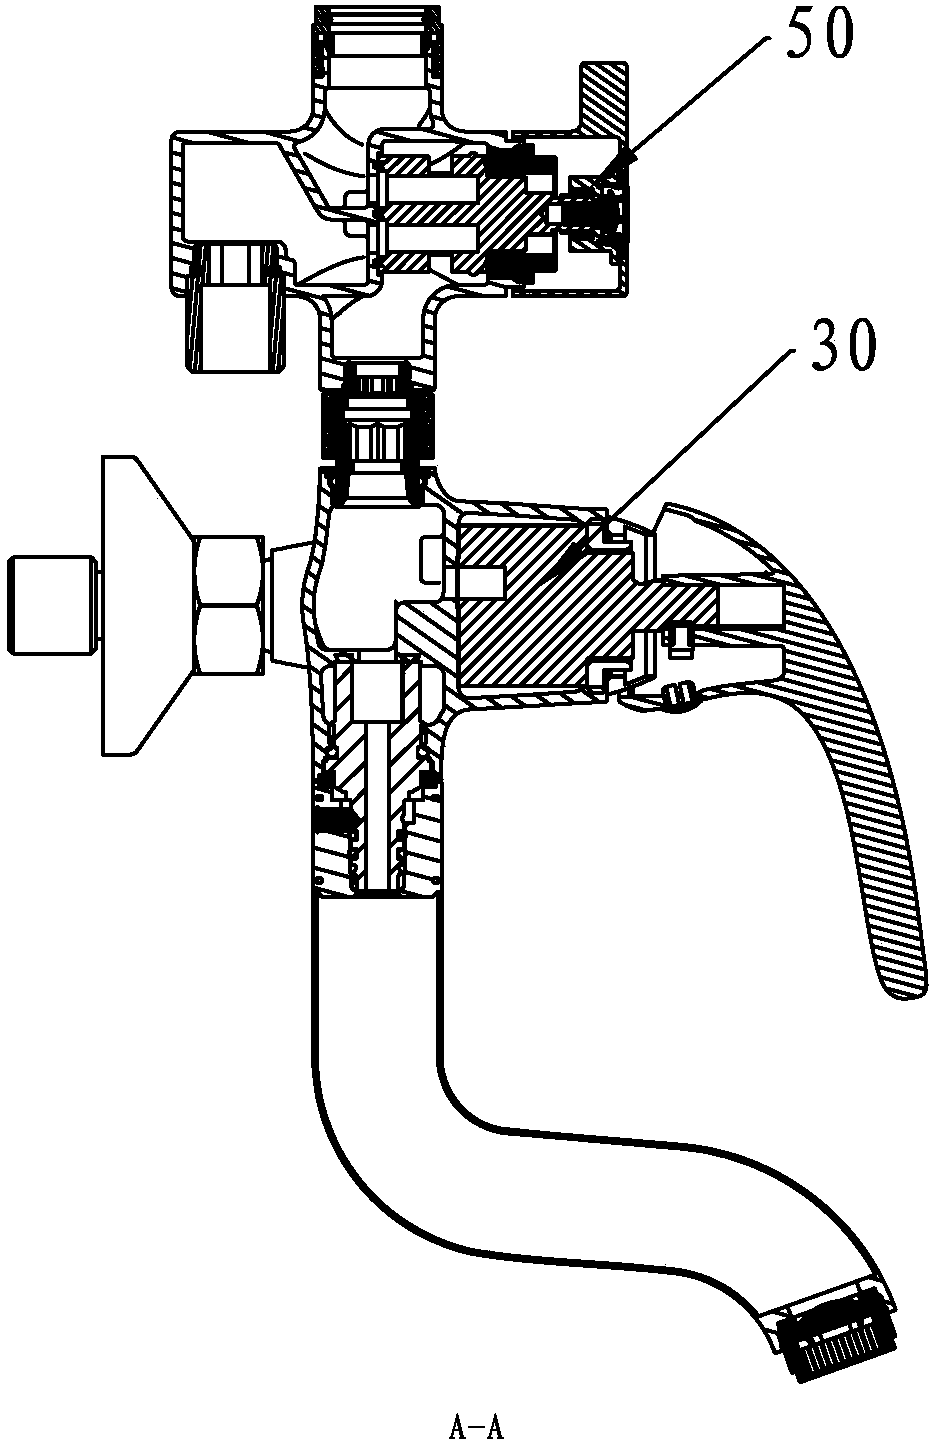 Control main body of shower system